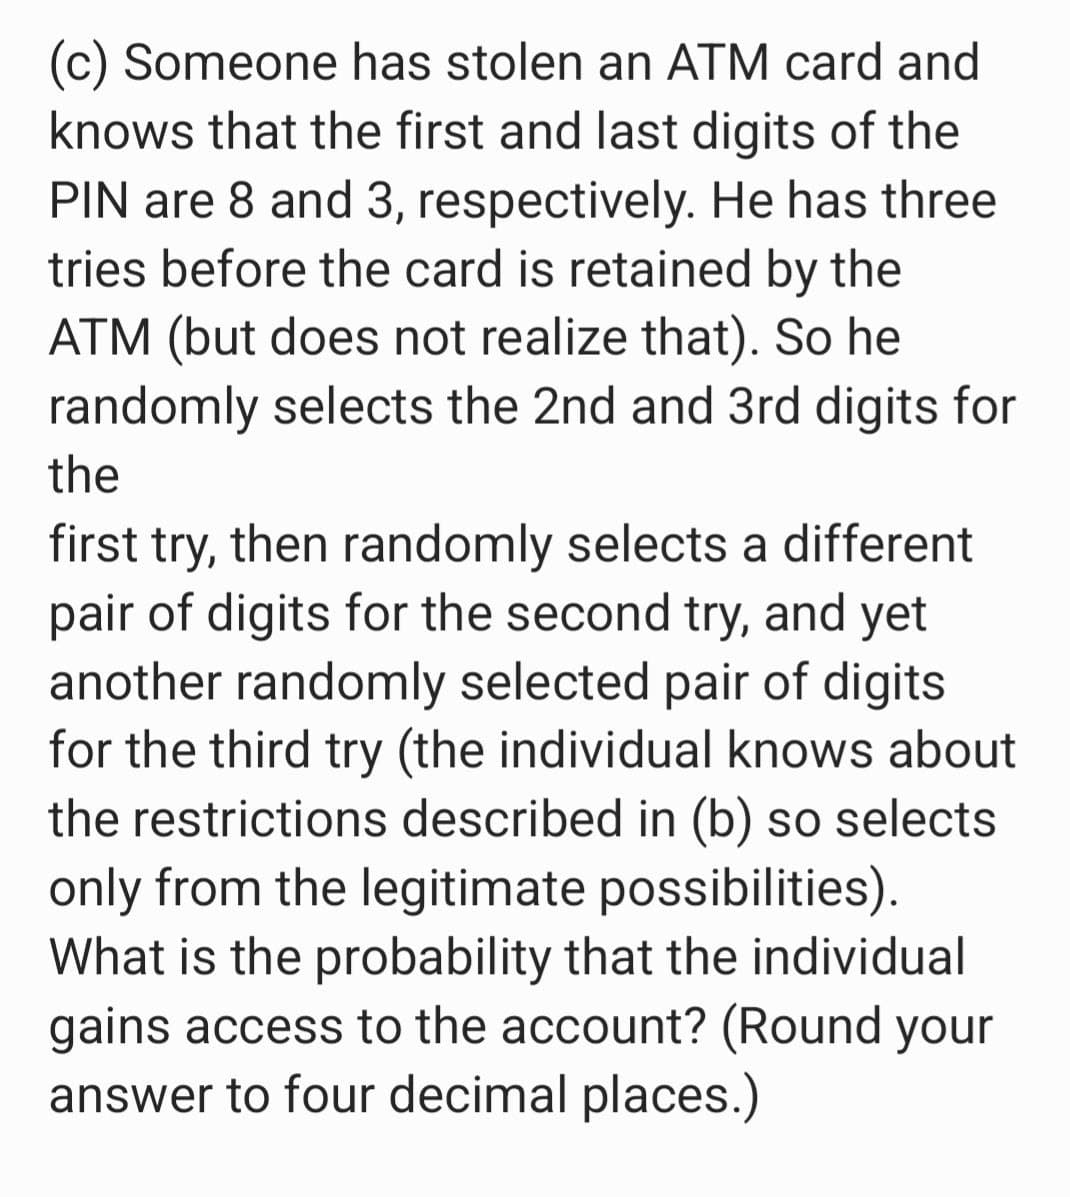 (c) Someone has stolen an ATM card and
knows that the first and last digits of the
PIN are 8 and 3, respectively. He has three
tries before the card is retained by the
ATM (but does not realize that). So he
randomly selects the 2nd and 3rd digits for
the
first try, then randomly selects a different
pair of digits for the second try, and yet
another randomly selected pair of digits
for the third try (the individual knows about
the restrictions described in (b) so selects
only from the legitimate possibilities).
What is the probability that the individual
gains access to the account? (Round your
answer to four decimal places.)